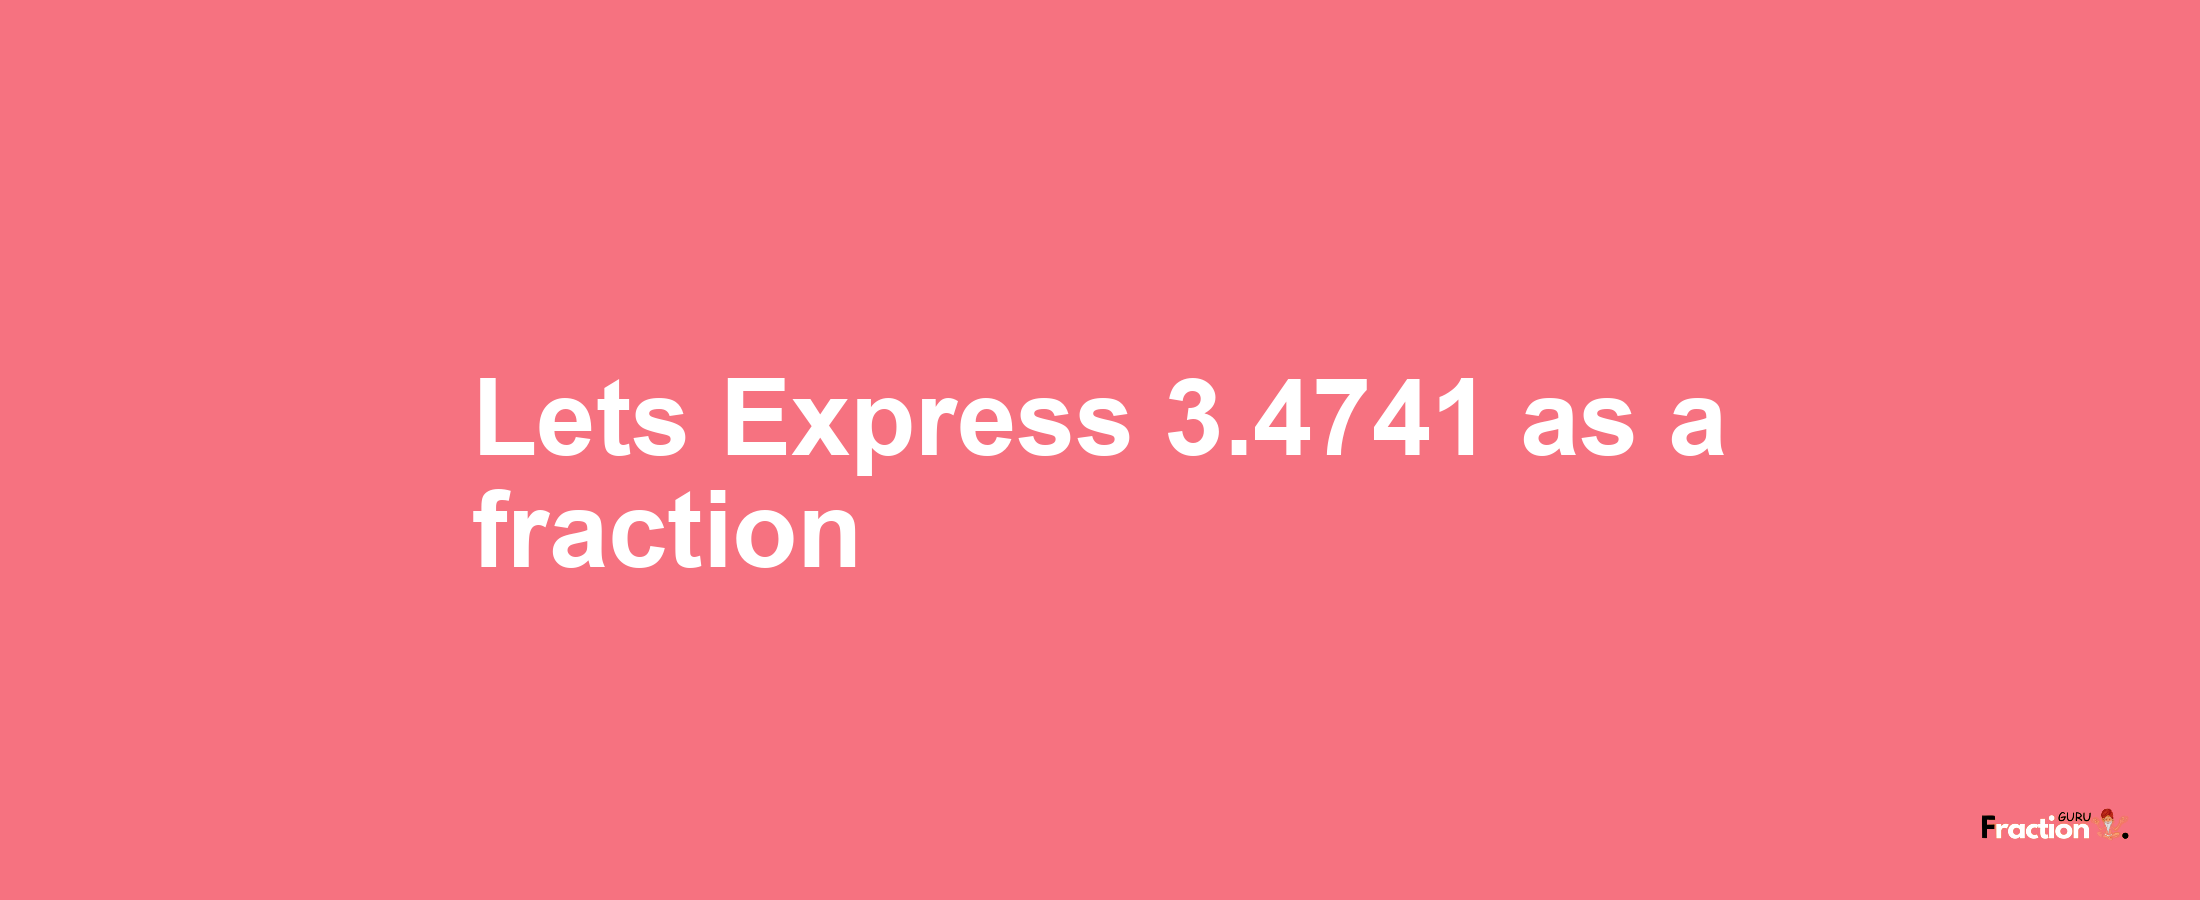 Lets Express 3.4741 as afraction